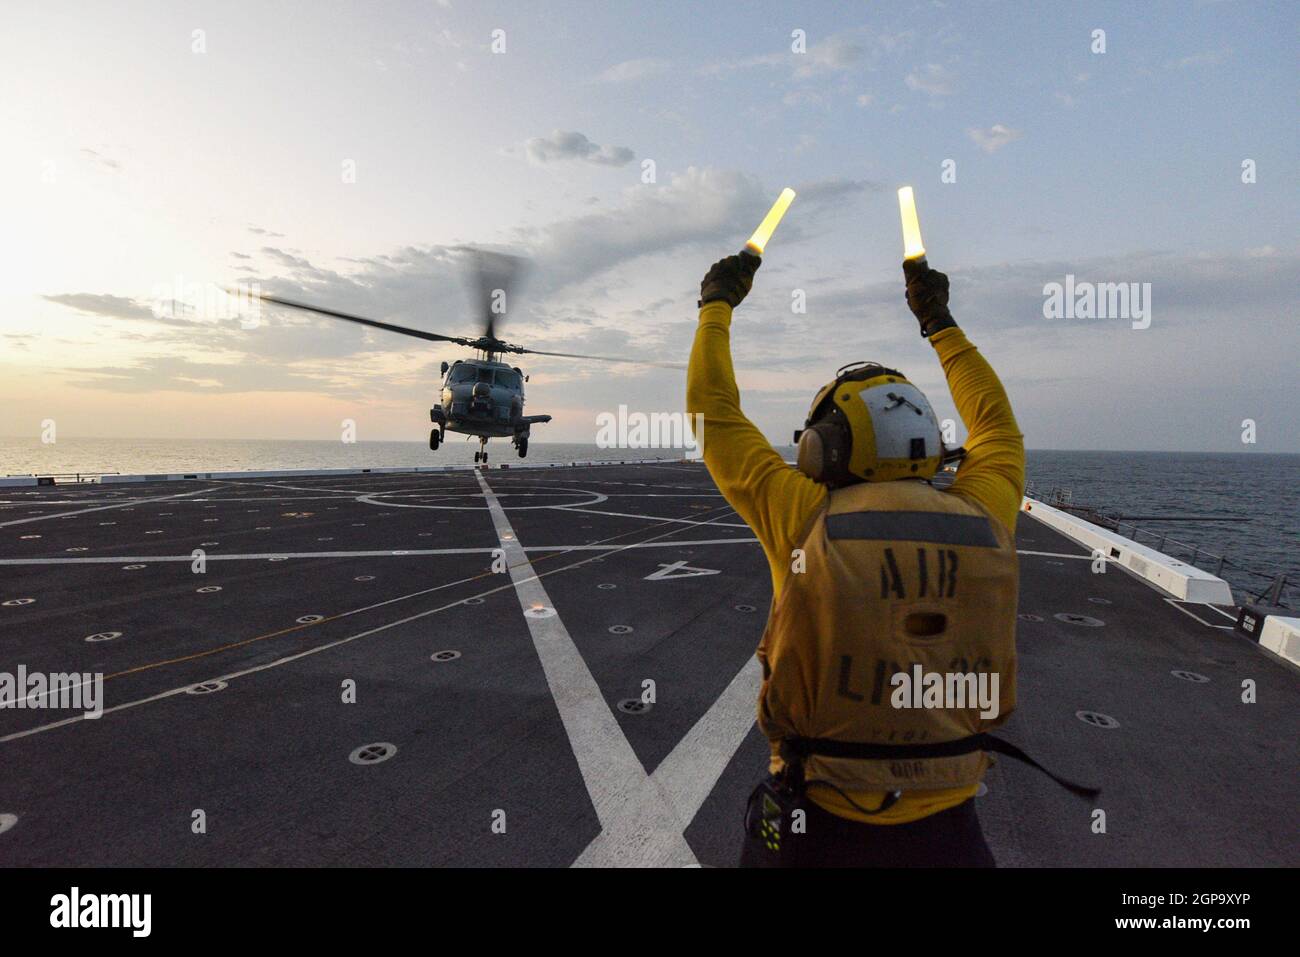 EASTERN PACIFIC OCEAN (Sept. 27, 2021) Aviation Boatswain’s Airman Kevon Lamont-Anderson, from Cleburn, Texas, assigned to the amphibious transport dock ship USS John P. Murtha (LPD 26) directs a MH-60R Sea Hawk helicopter attached to the “Scorpions” of Helicopter Maritime Strike Squadron (HSM) 49 to take off from flight deck during UNITAS LXII, Sept. 27, 2021.  UNITAS is the world’s longest-running maritime exercise. Hosted this year by Peru, it brings together multinational forces from 20 countries and includes 32 ships, four submarines, and 26 aircraft conducting operations off the coast of Stock Photo